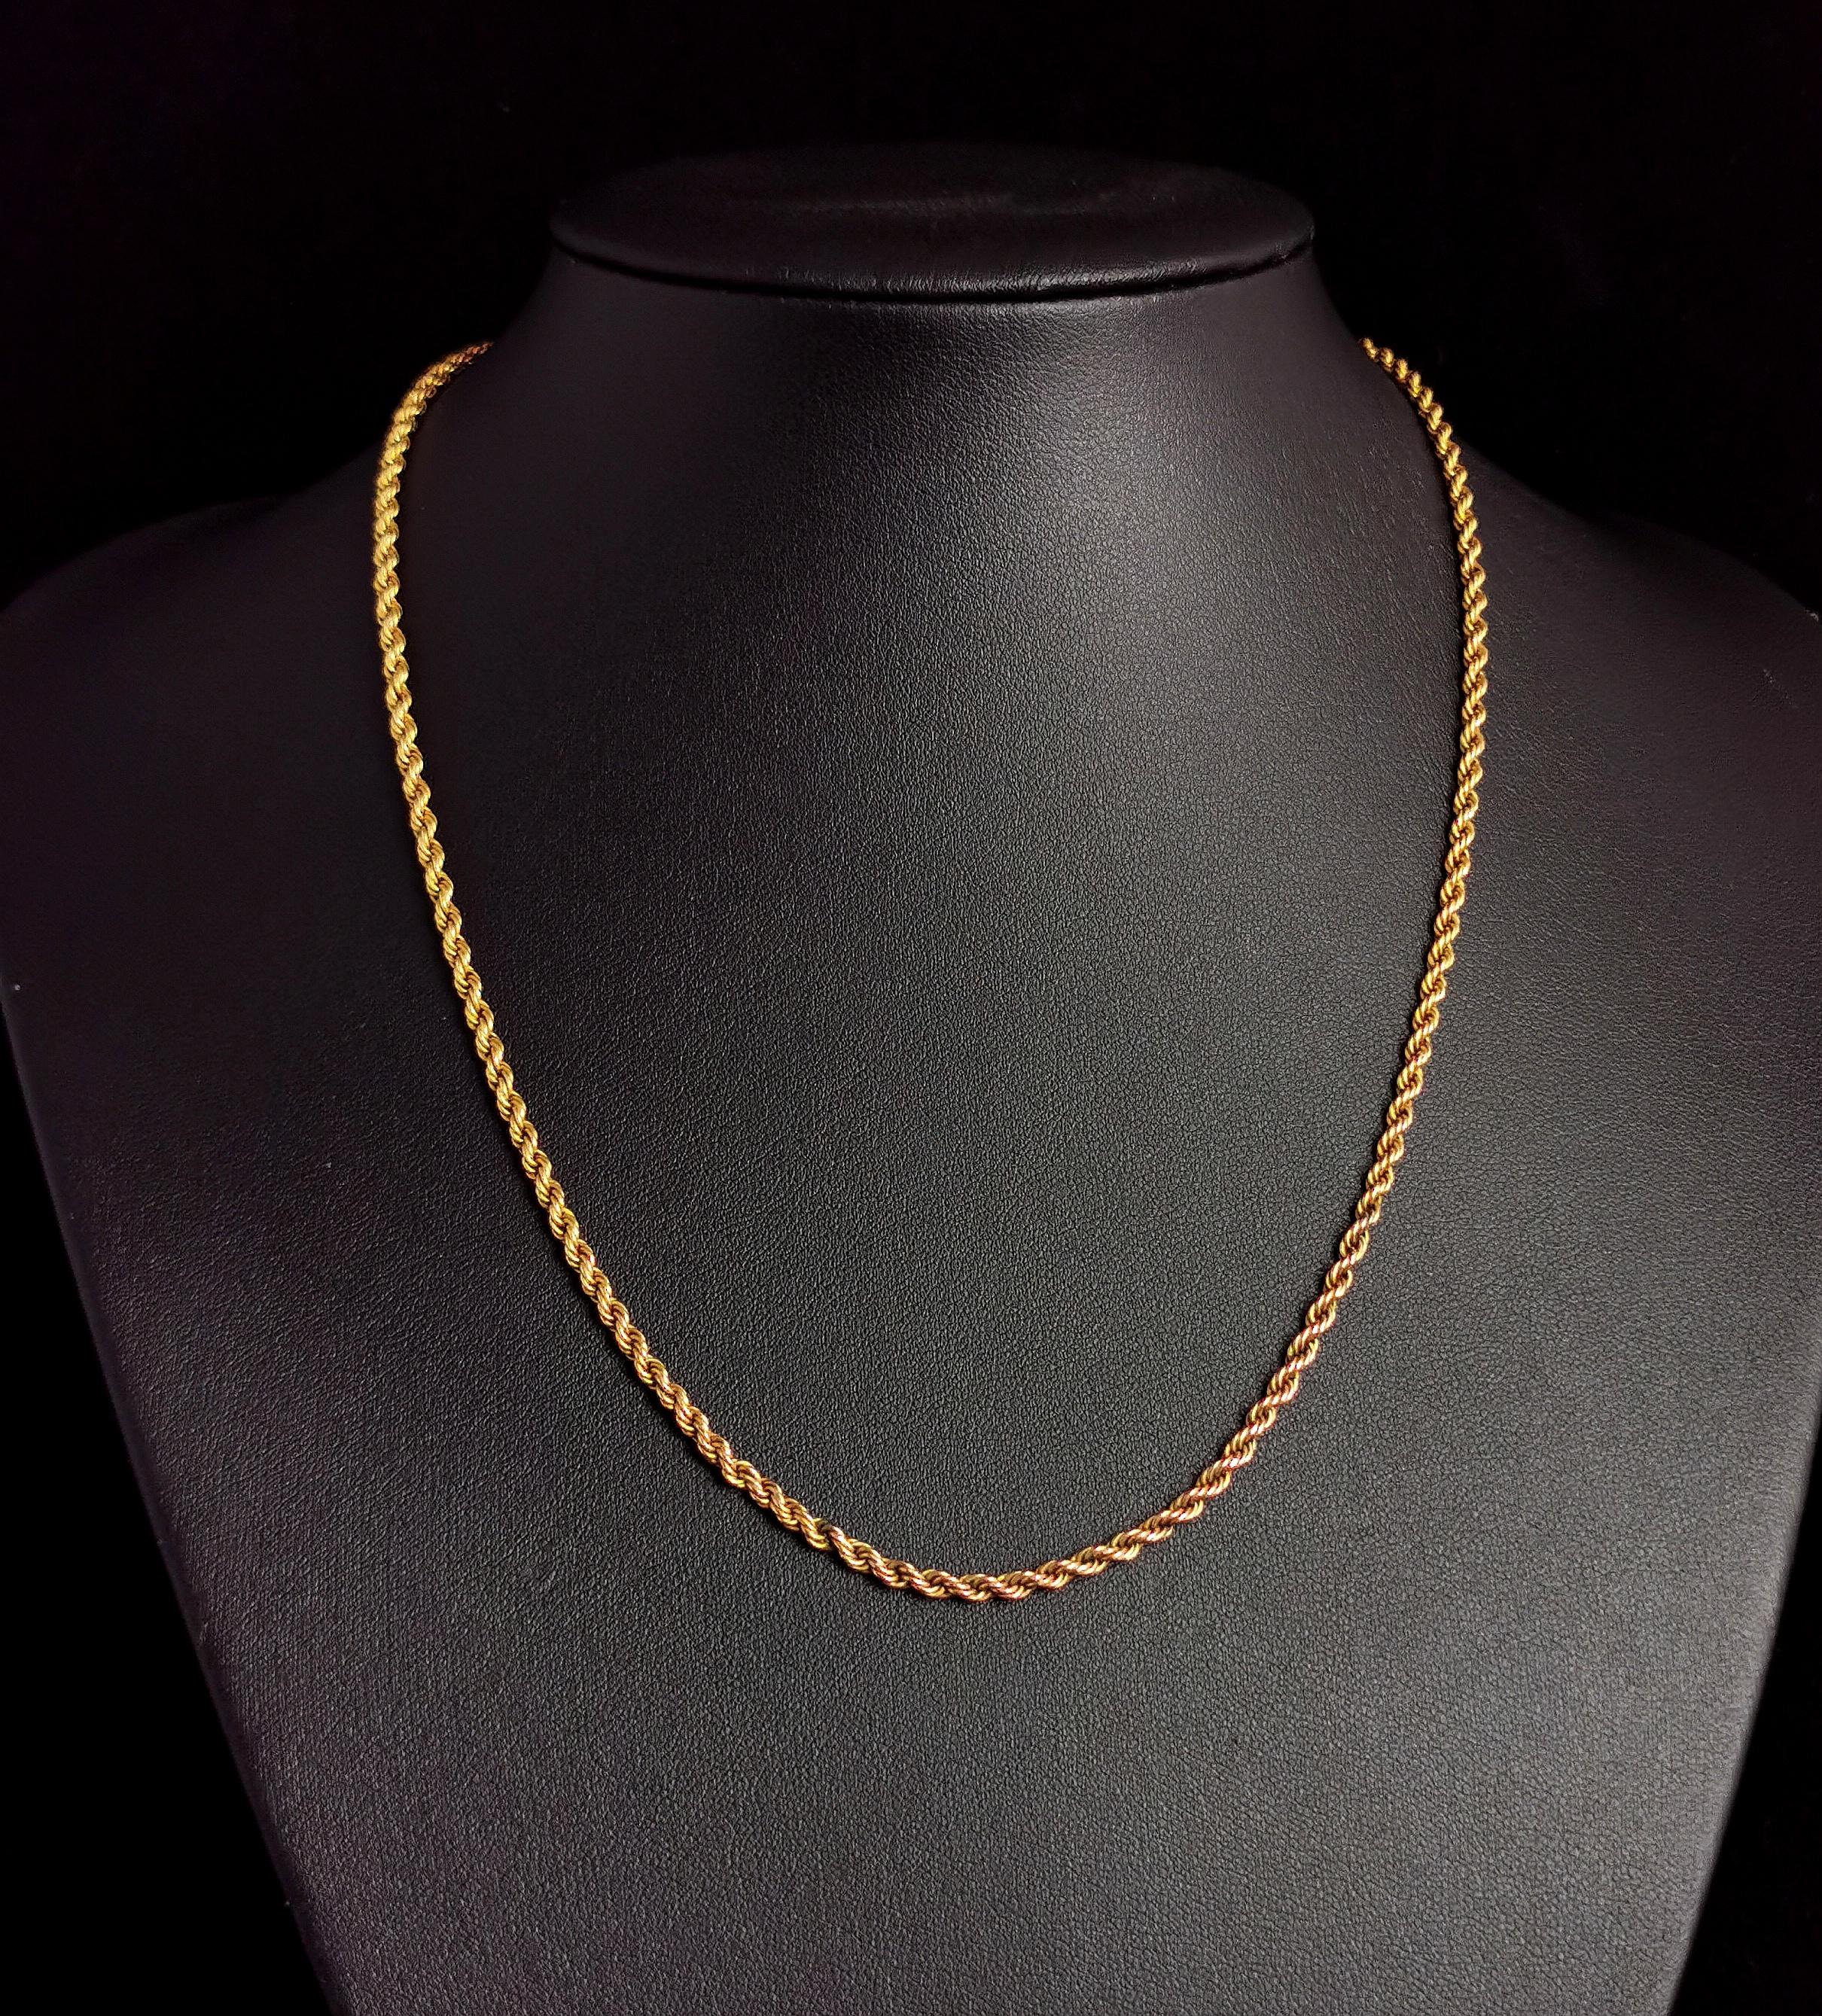 Women's Antique 9k Yellow Gold Rope Chain Necklace, Edwardian